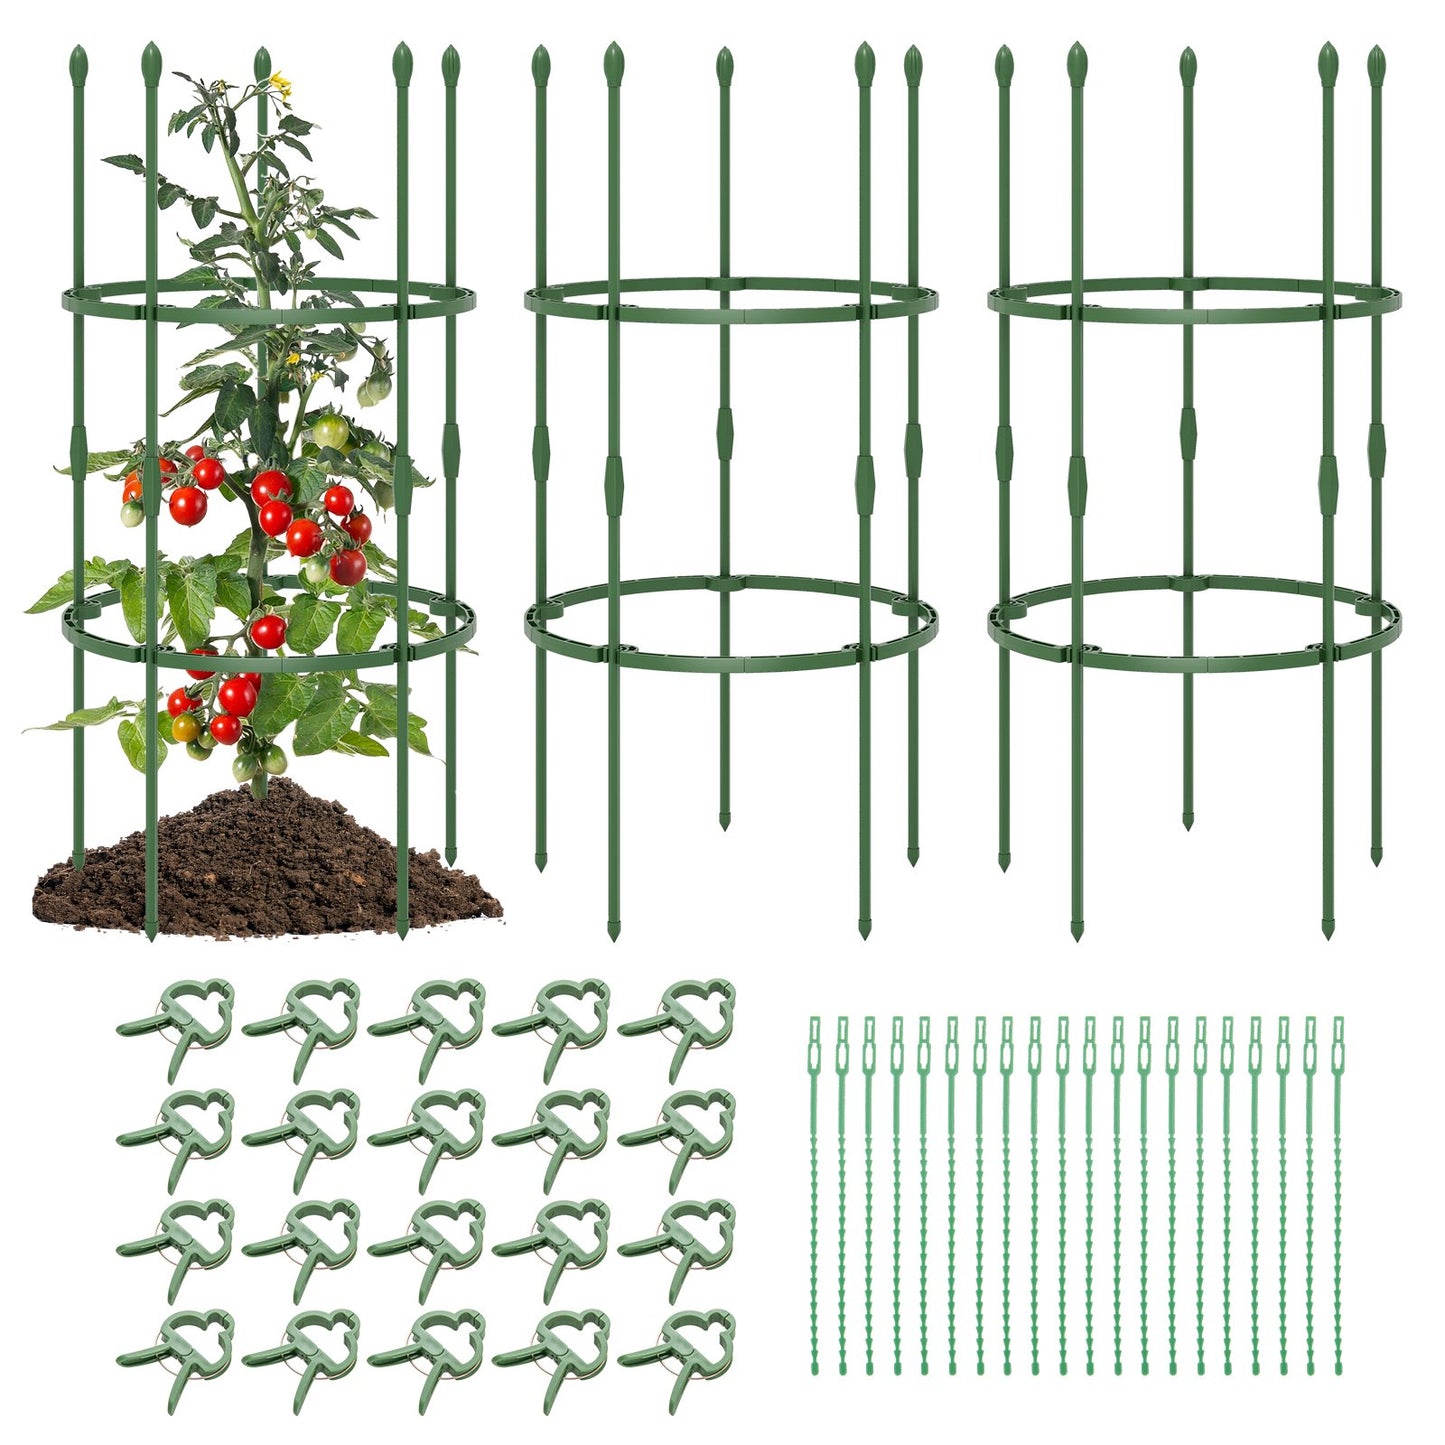 3-Pack Garden Trellis 40"/60" Tall Plant Support Stands with Clips and Ties-S, Green